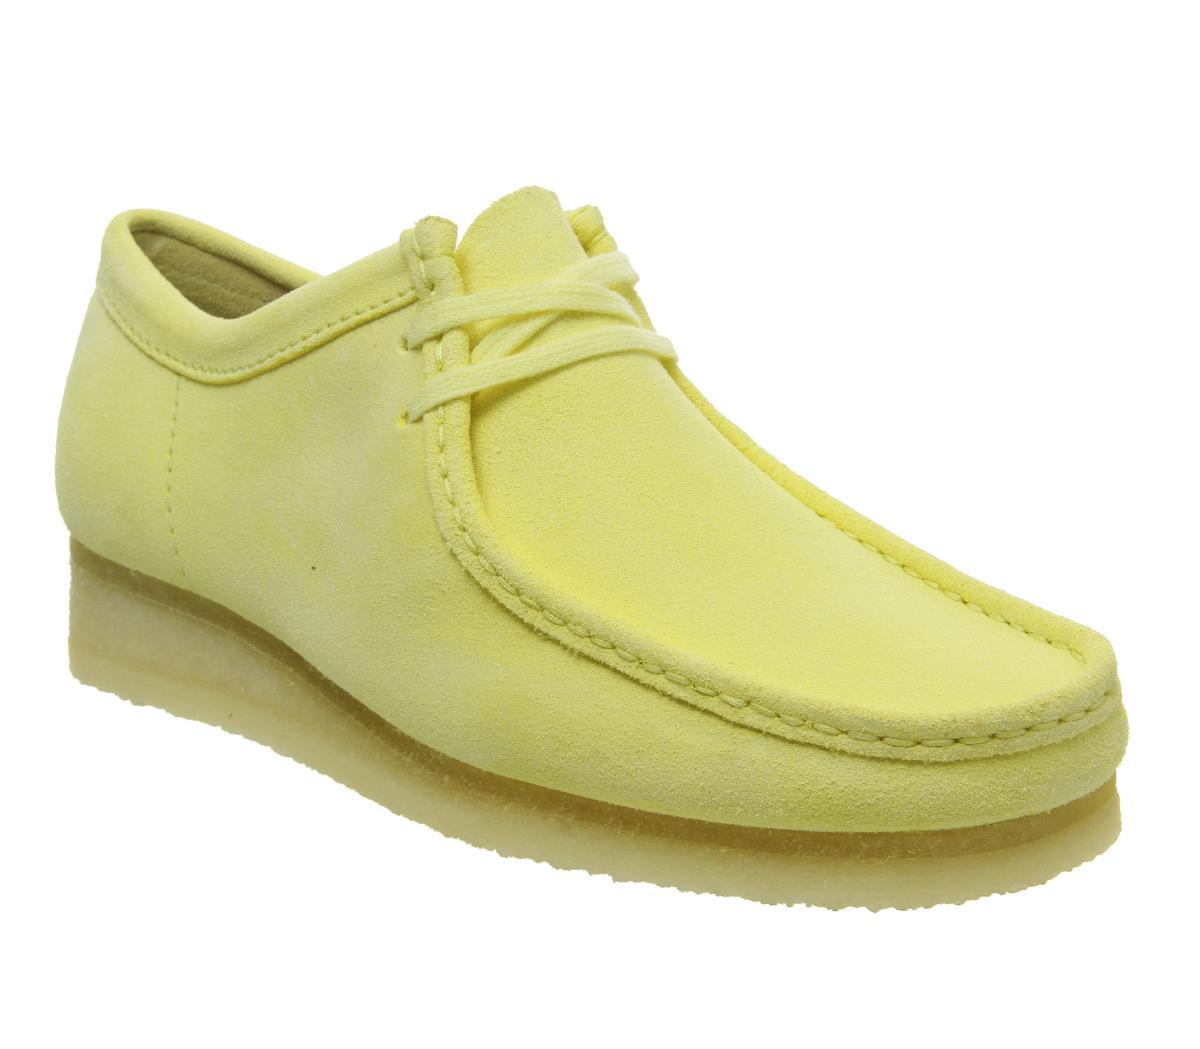 pale yellow shoes